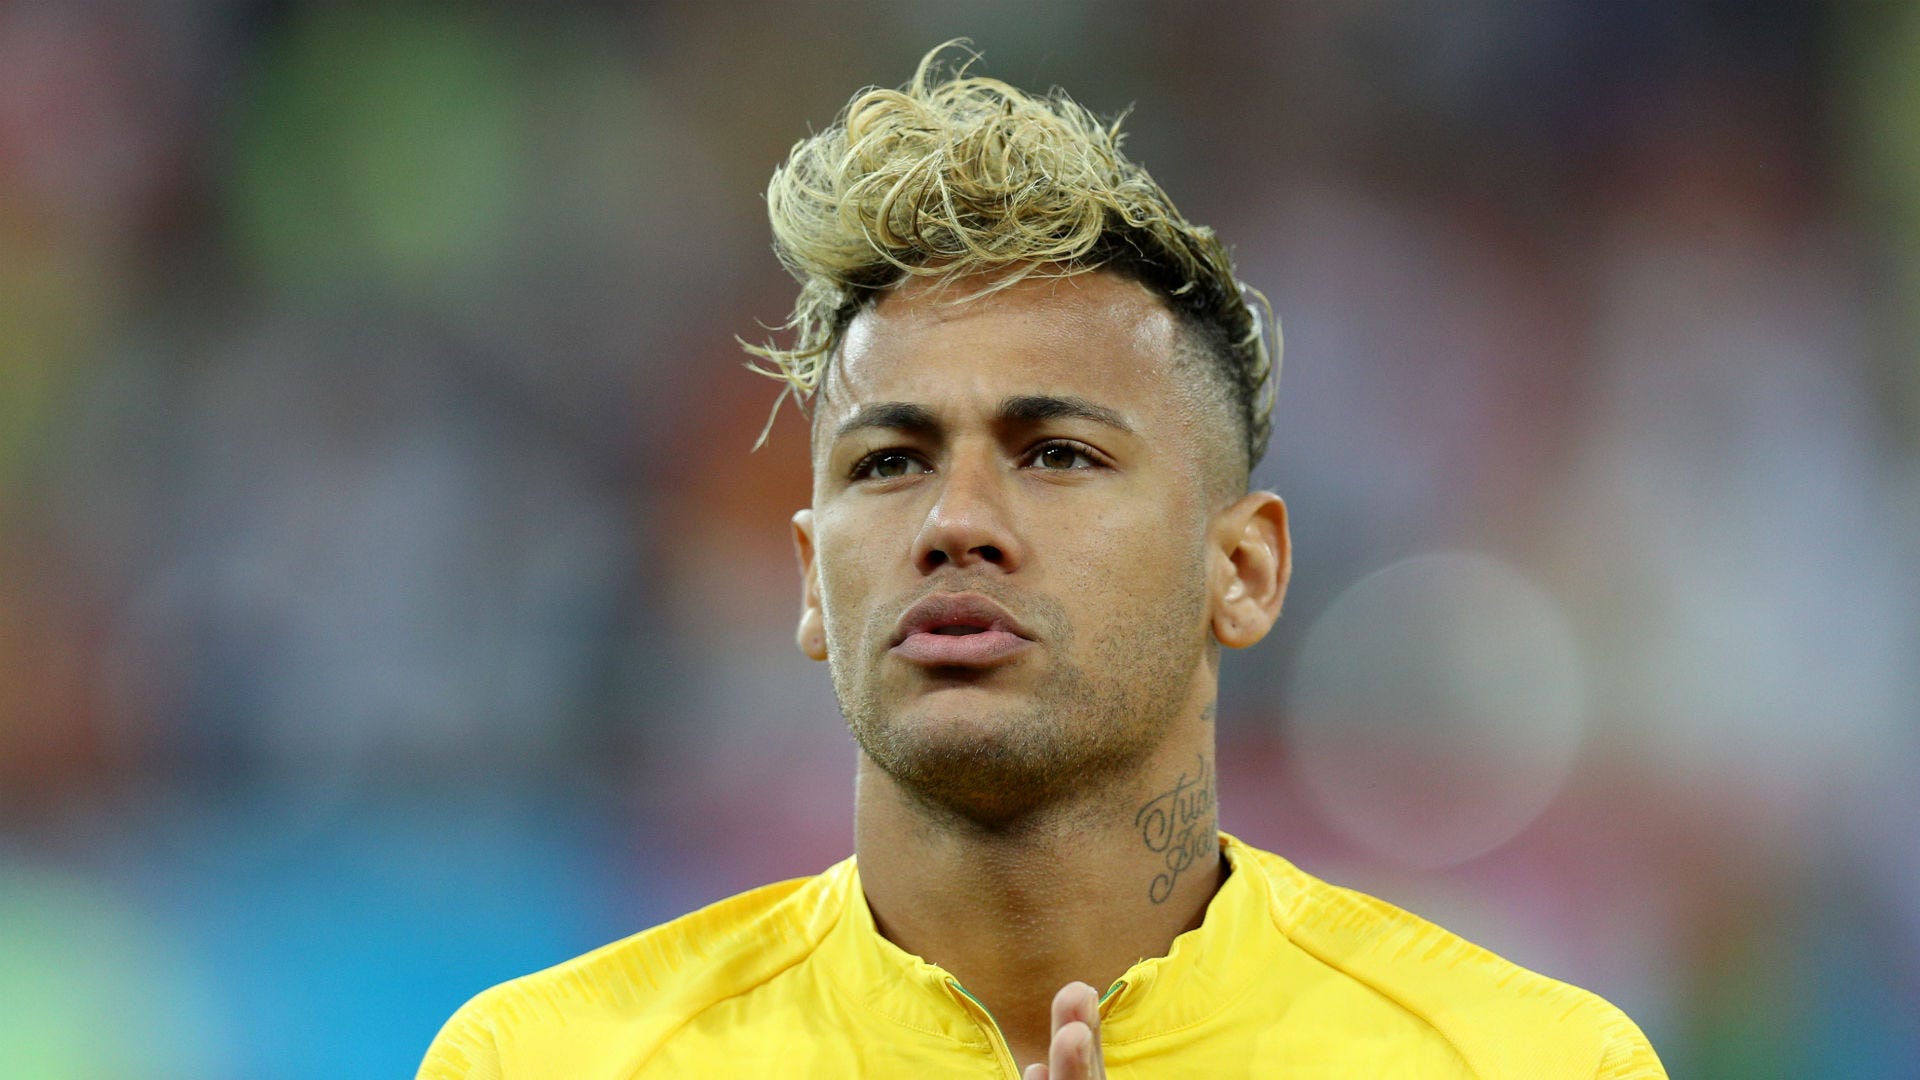 Neymar new hairstyle and haircut for the World Cup 2014  Neymar Jr   Brazil and PSG  2023